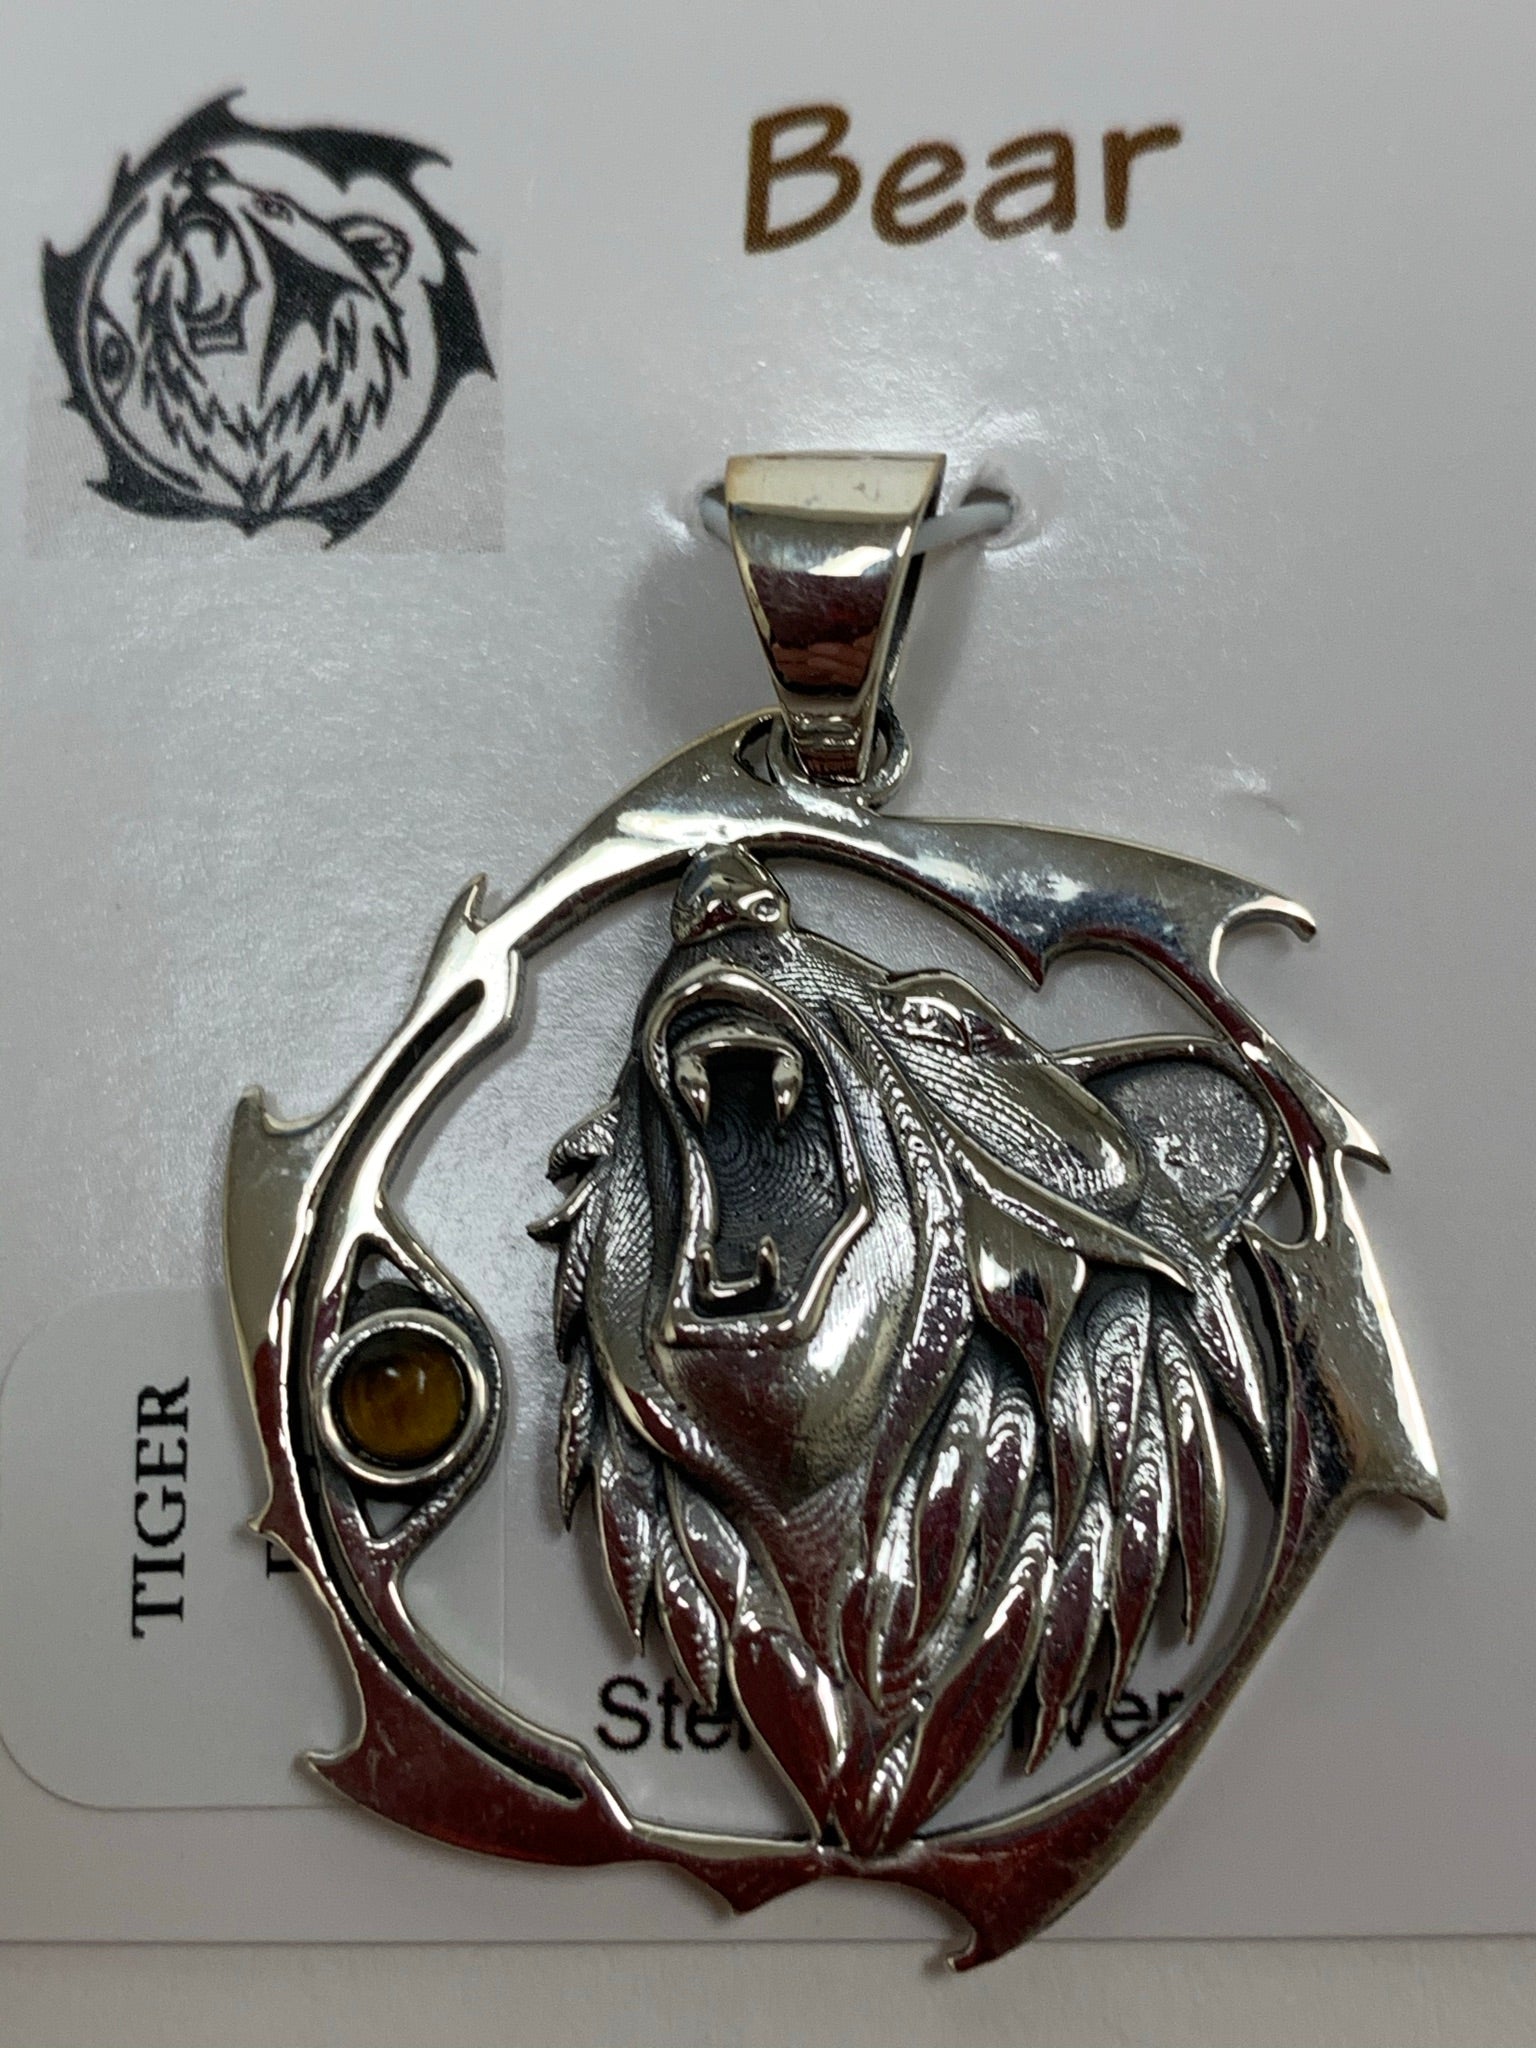 Sterling silver bear animal pendant, accented with a tiger eye gemstone. Bear is set within an open, stylized circle with the gemstone along the side (bear and circle are sterling). Wear your spirit animal's energy so you have it everywhere you go! Pendant only - necklace chain not included.